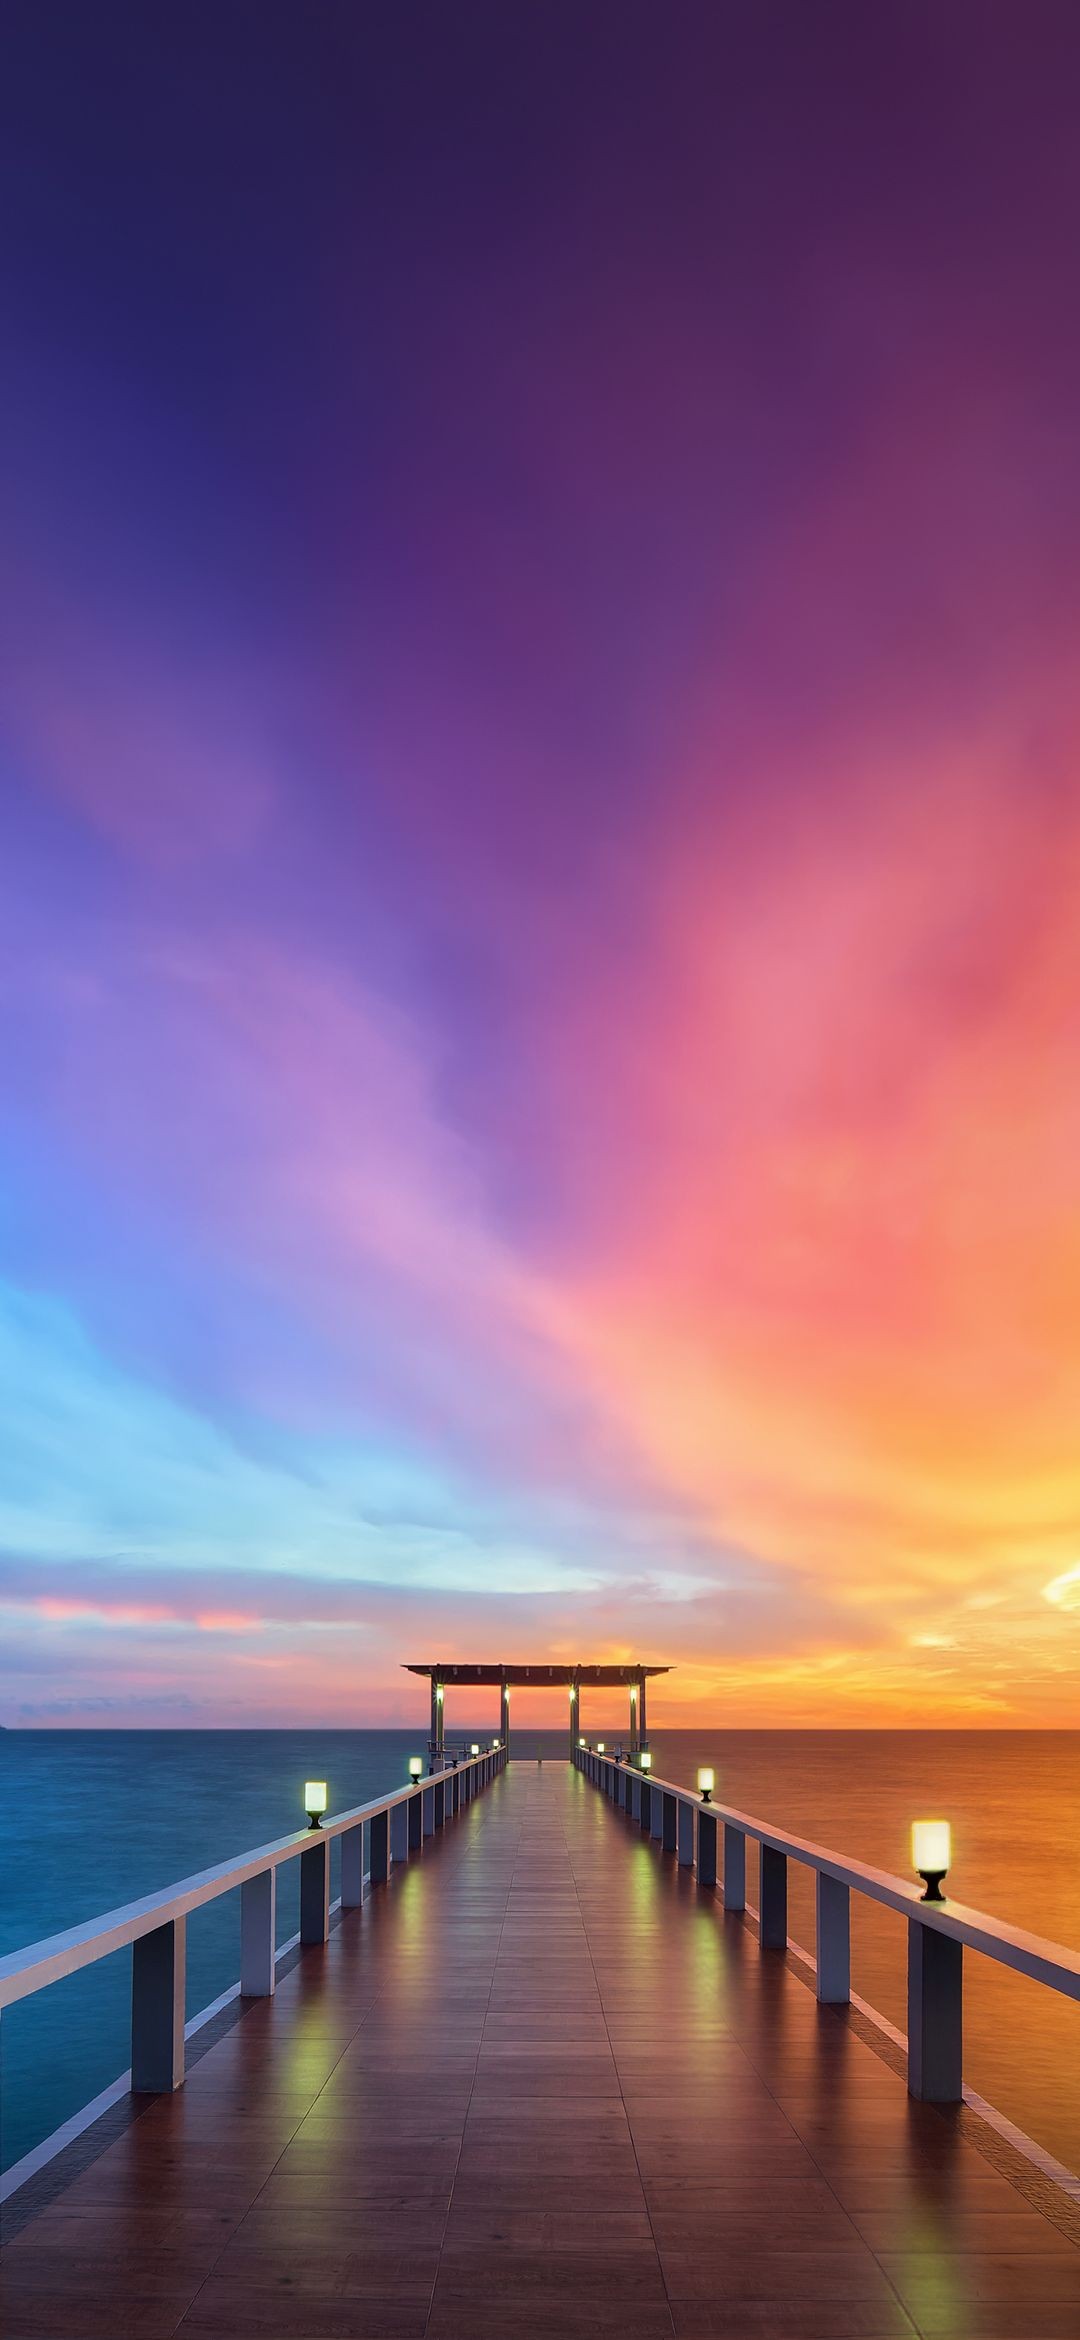  Wallpapers  Samsung  Galaxy A50  Pack 1